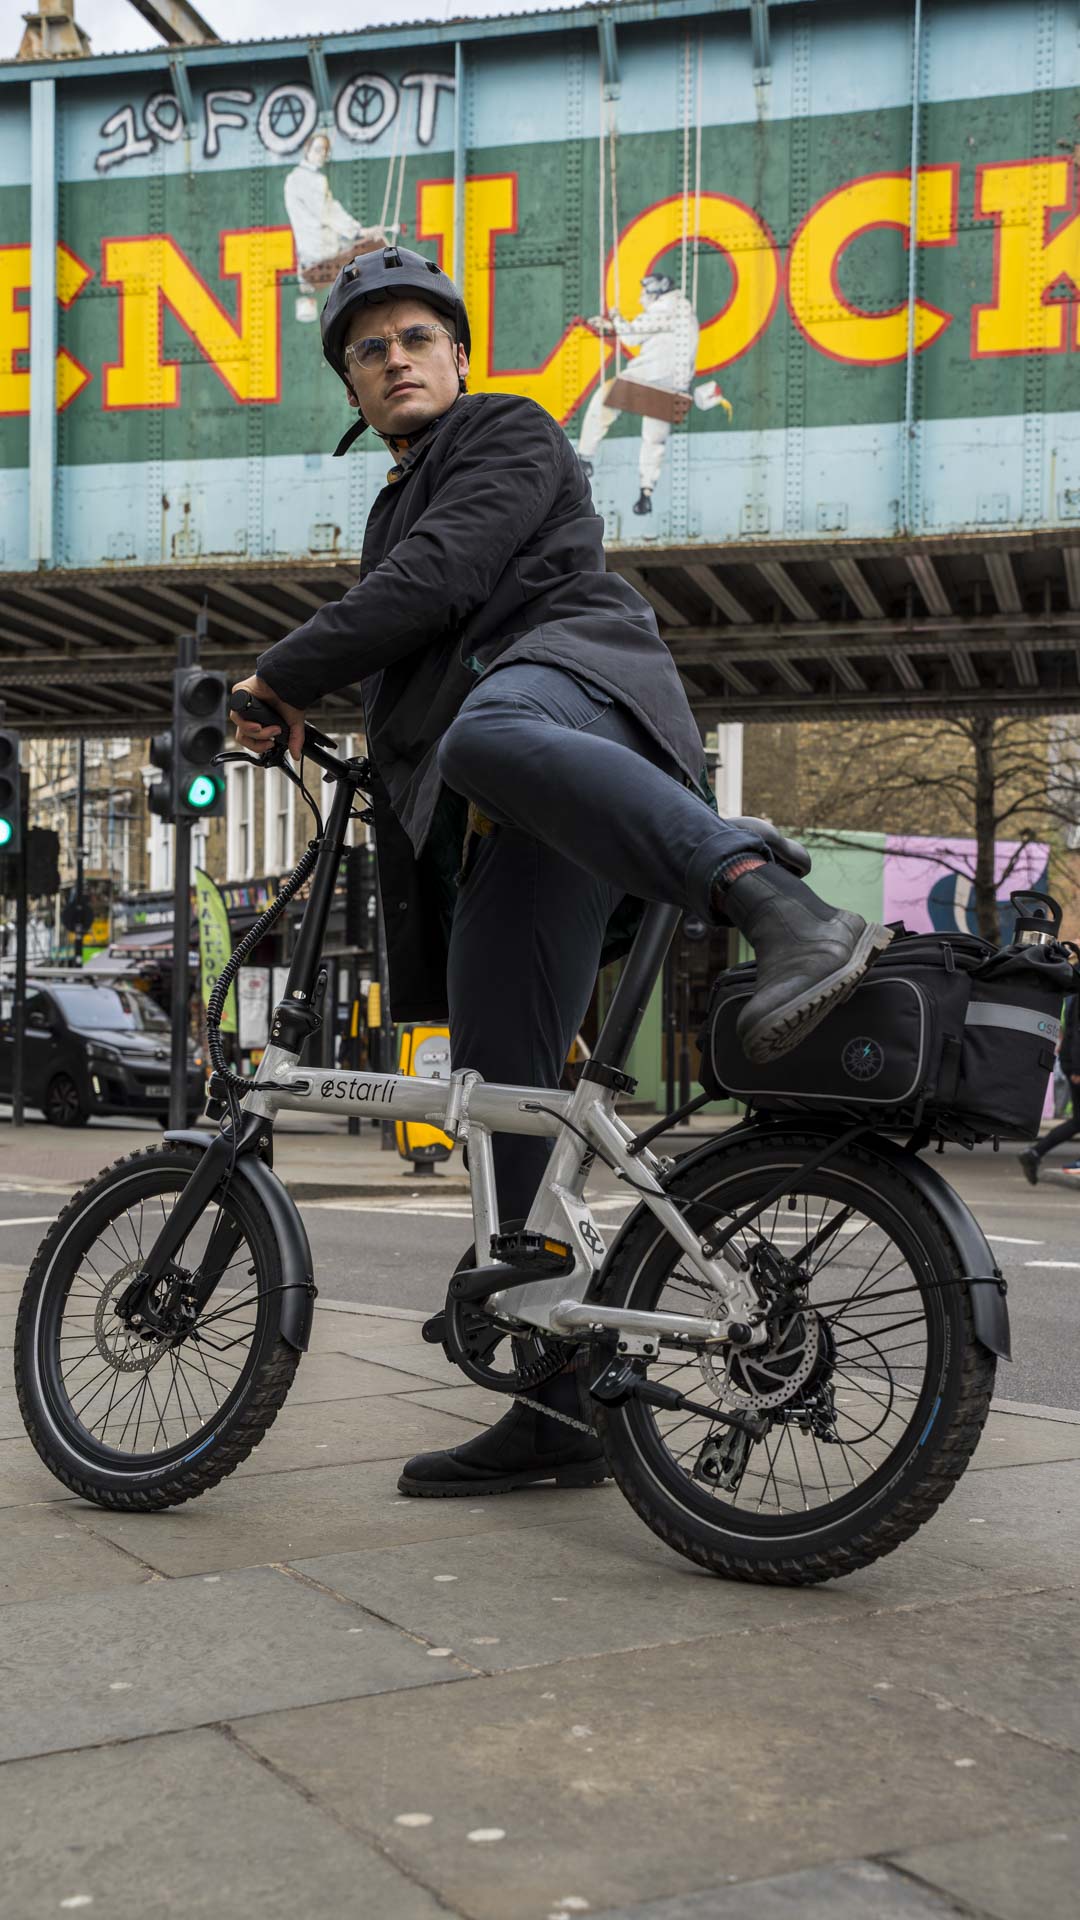 The ultimate off-road folding eBike made in Britain. The estarli e20.8 Play is robust yet lightweight and packs 50Nm torque and balloon tyres for comfort.